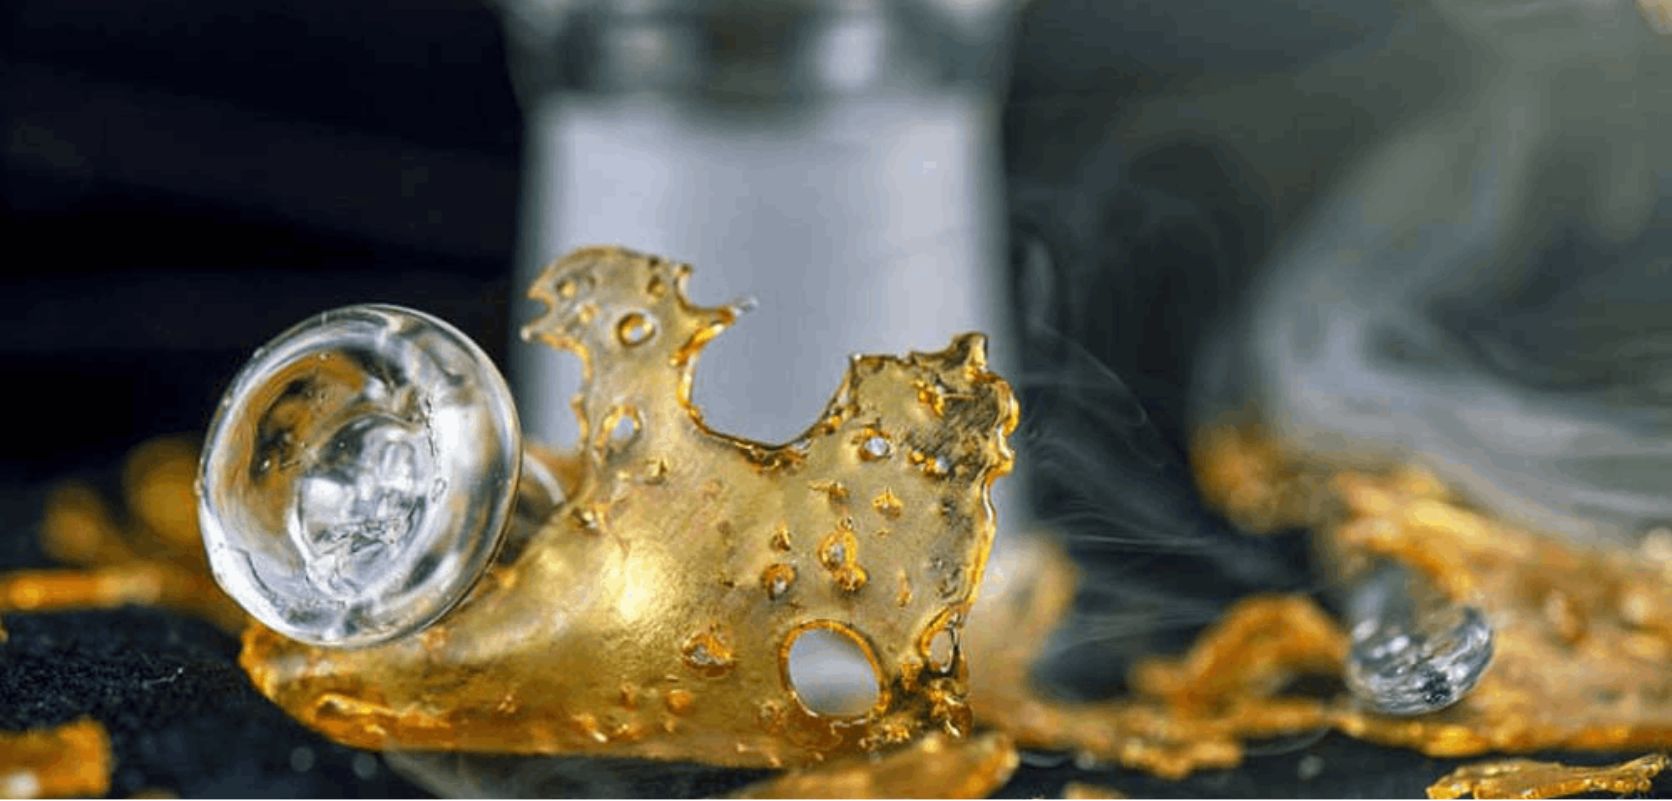 Shatter is a type of cannabis concentrate that's really cranked the dial up to 11 on the THC content. 